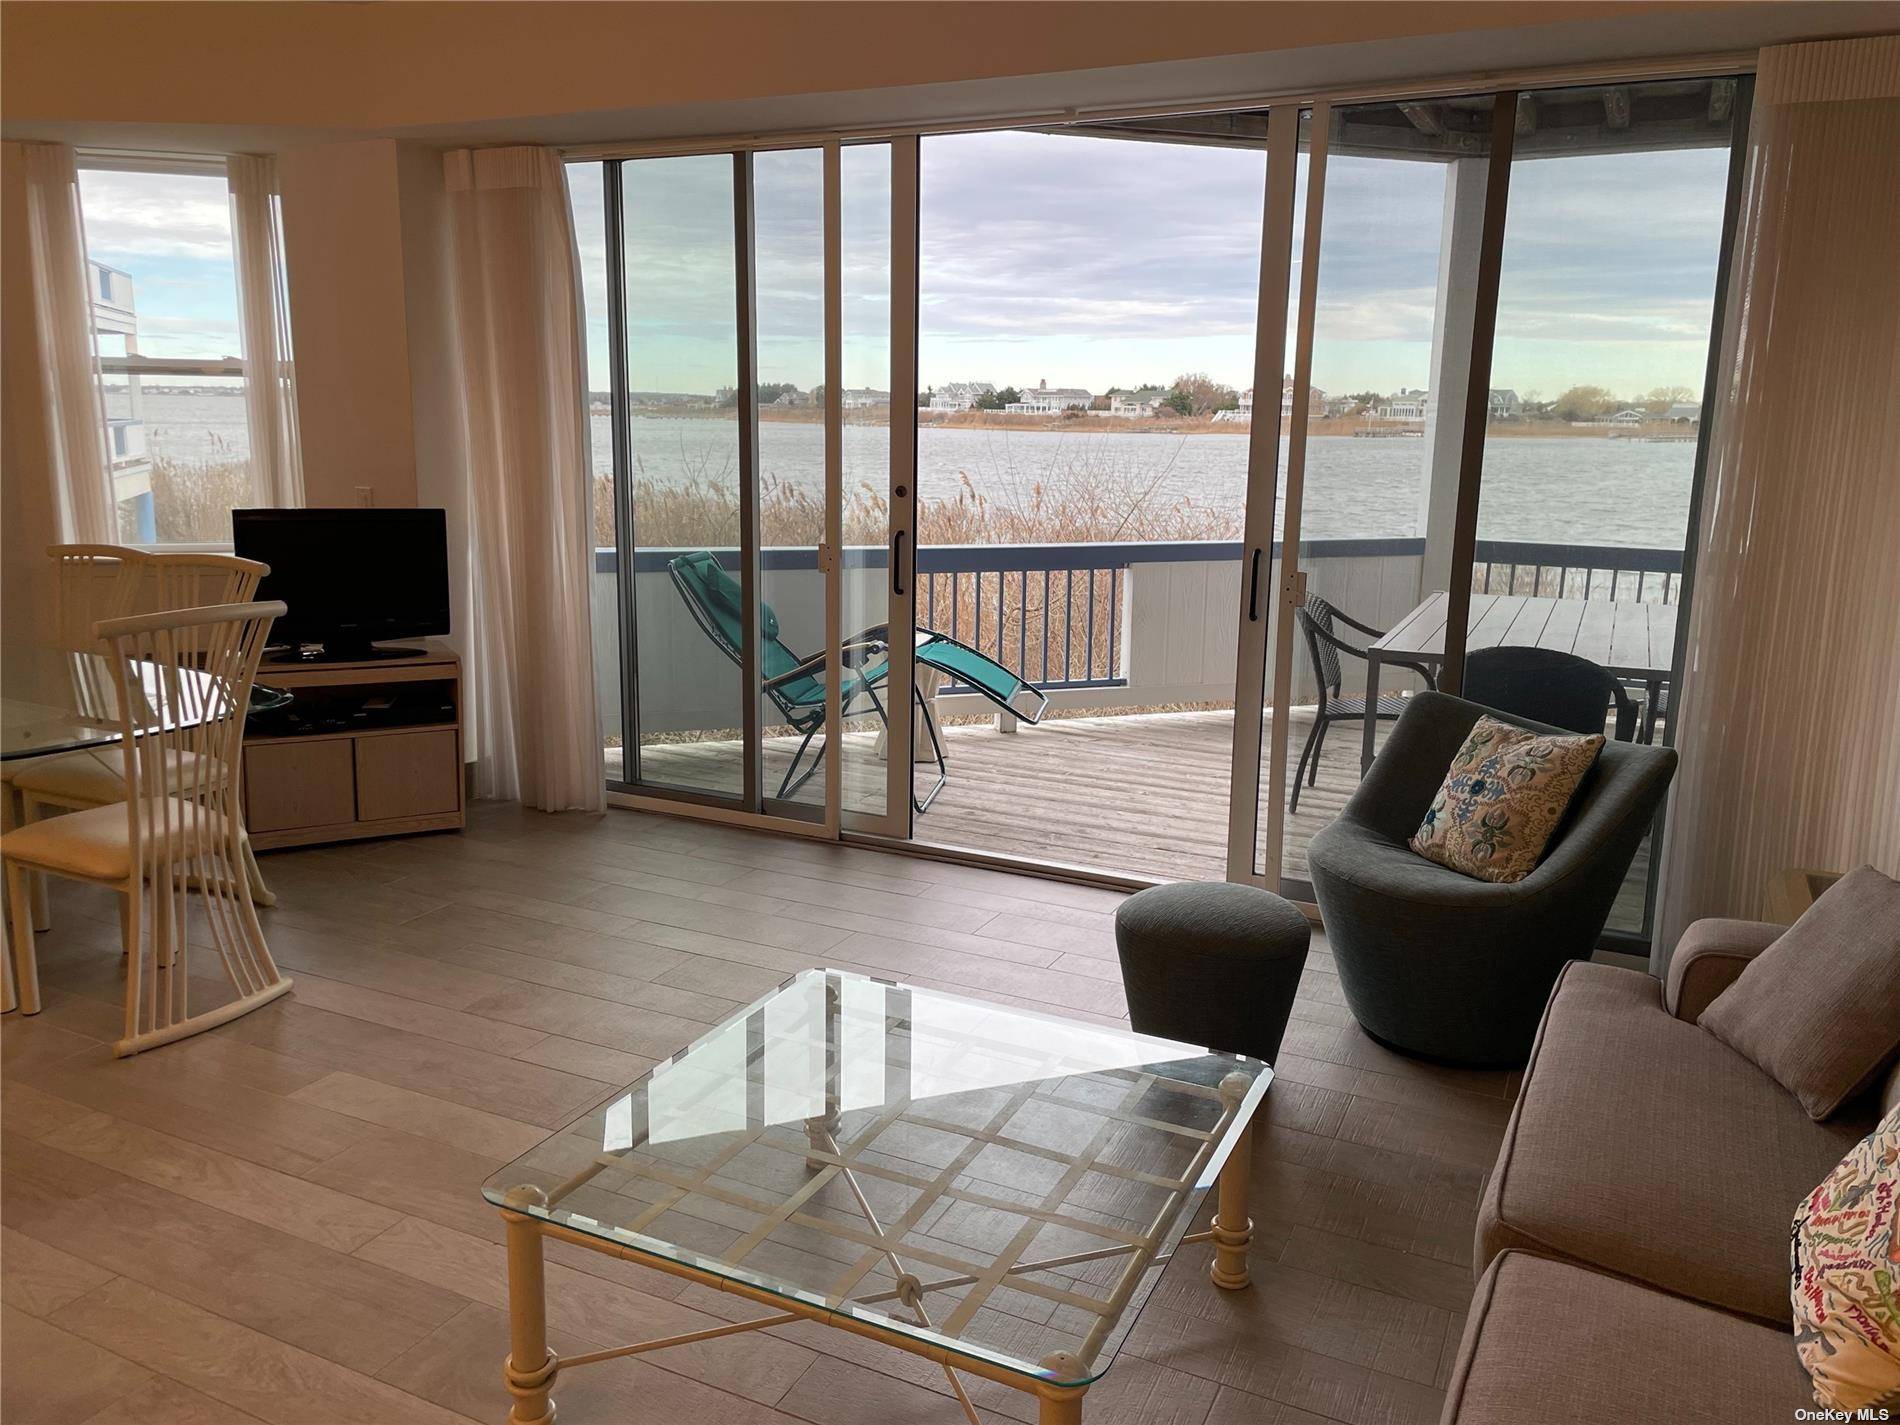 Spacious 2 bedroom 2 bath Dune Road bayfront has amazing views of Moriches Bay.